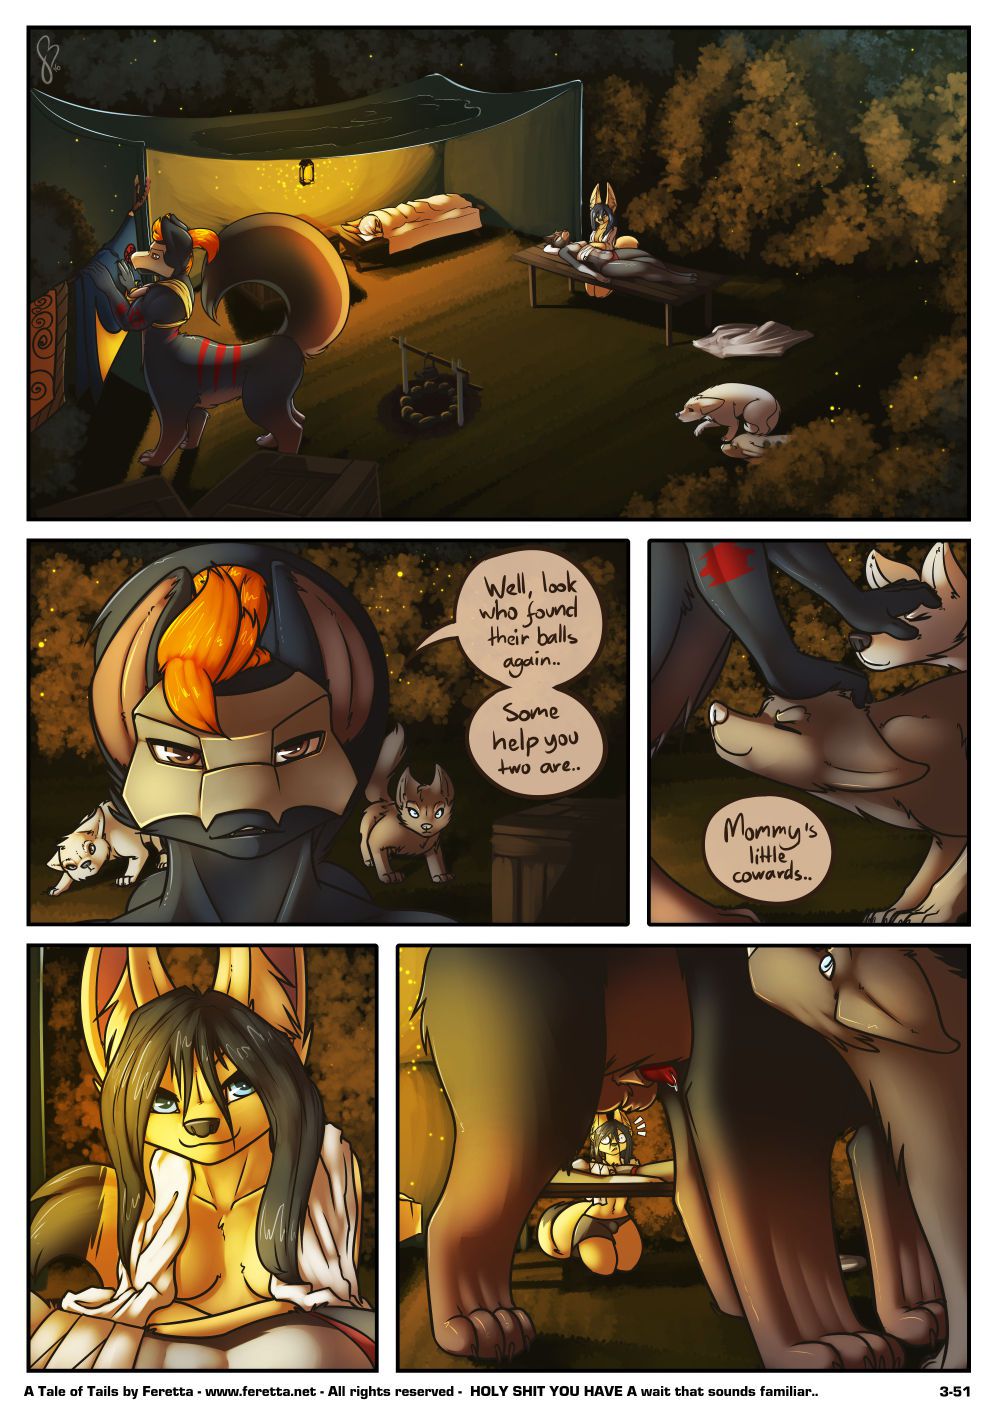 [Feretta] A Tale of Tails (Ongoing) 140